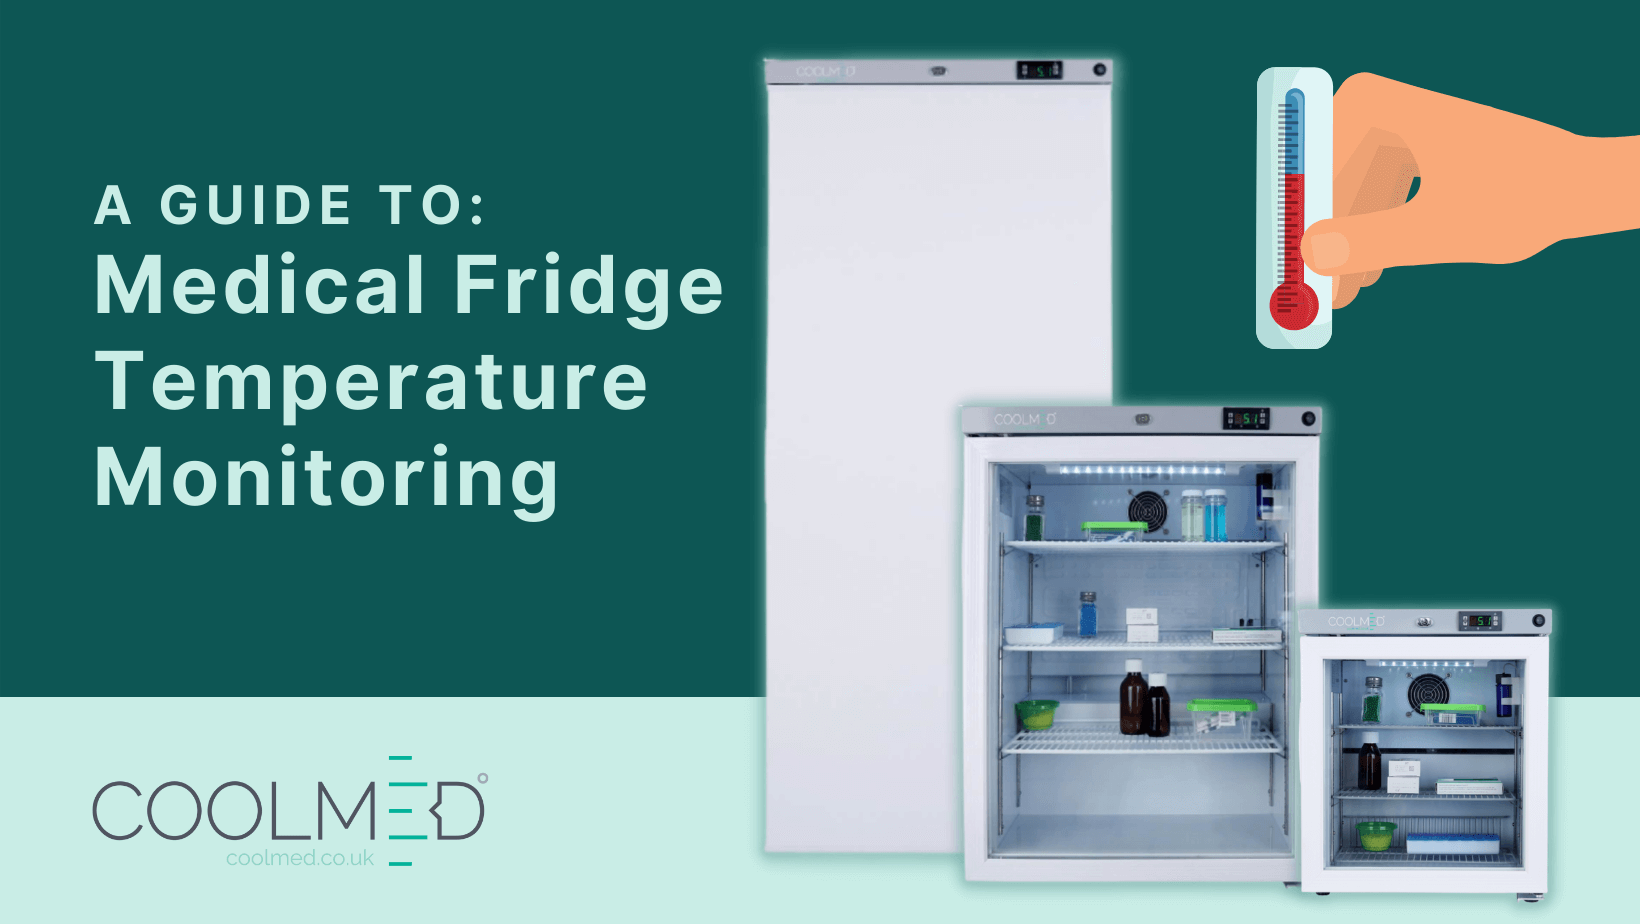 A guide to monitoring the temperature of a medical fridge graphic by CoolMed